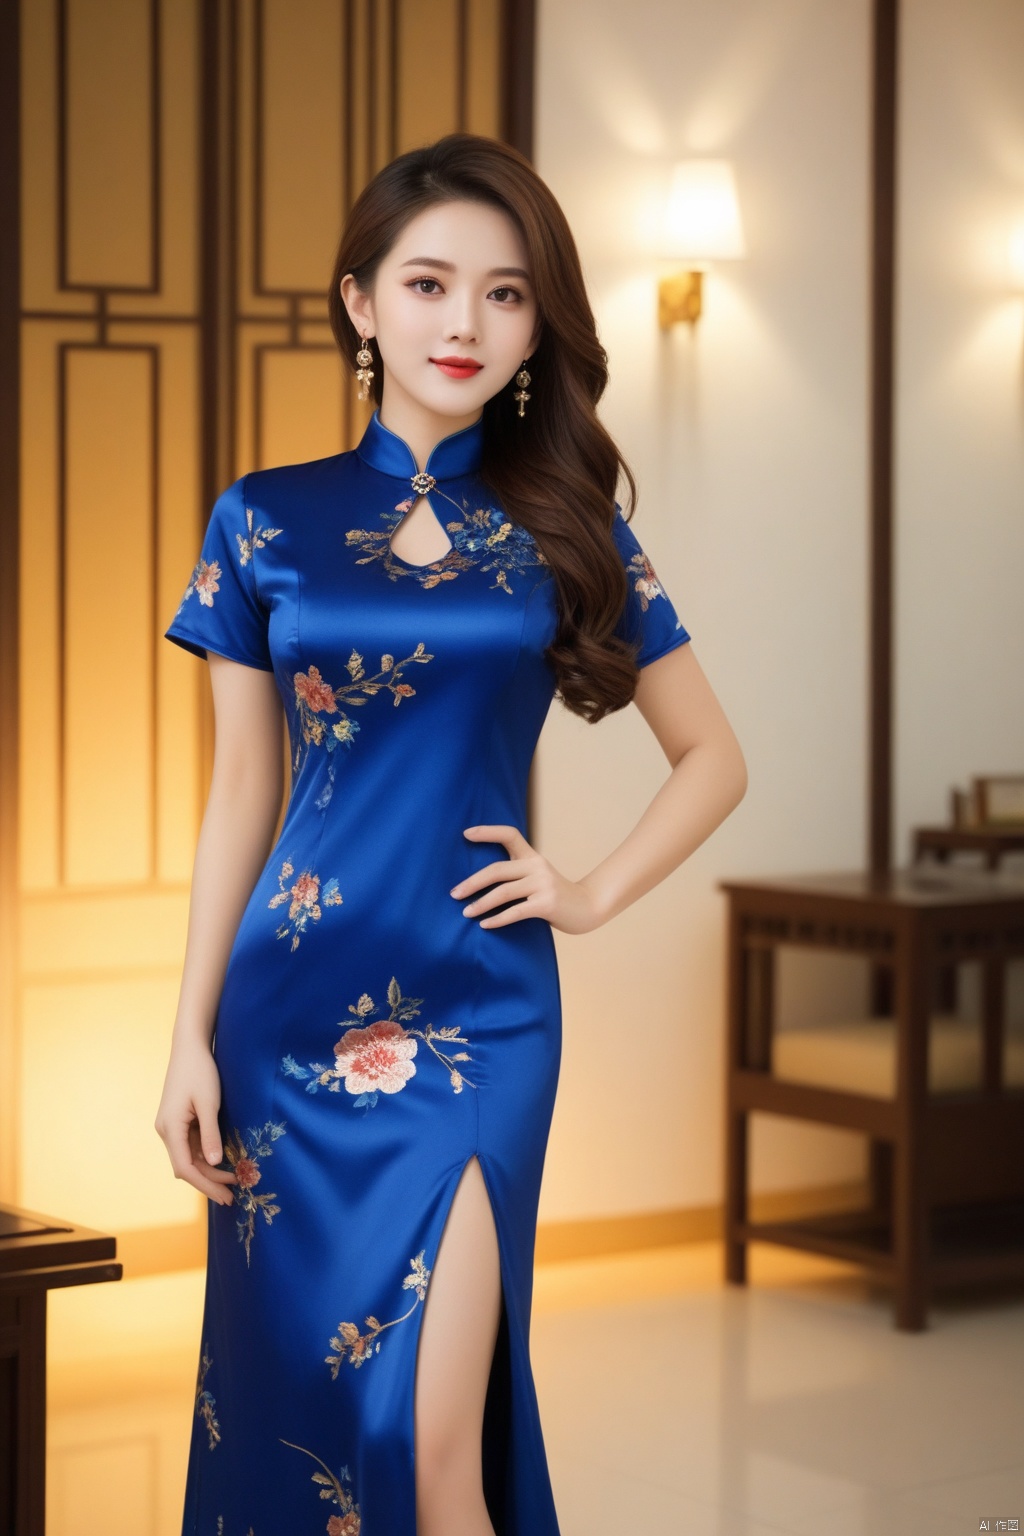 (a Busty lady),(Elegant),((cowboy_shot)), (full body:1.5), ((Blue printed satin short-sleeved cheongsam)), Long skirt with side slit, (Long curly hair), ((Floral Hairpin)), ((Pearl necklace)), (((Pendant earrings made of gold))),(((engagement ring))),(((A bracelet made of jade))), ((A lady stands in the living room)),(At night, warm and soft lighting),
, ((poakl)), 